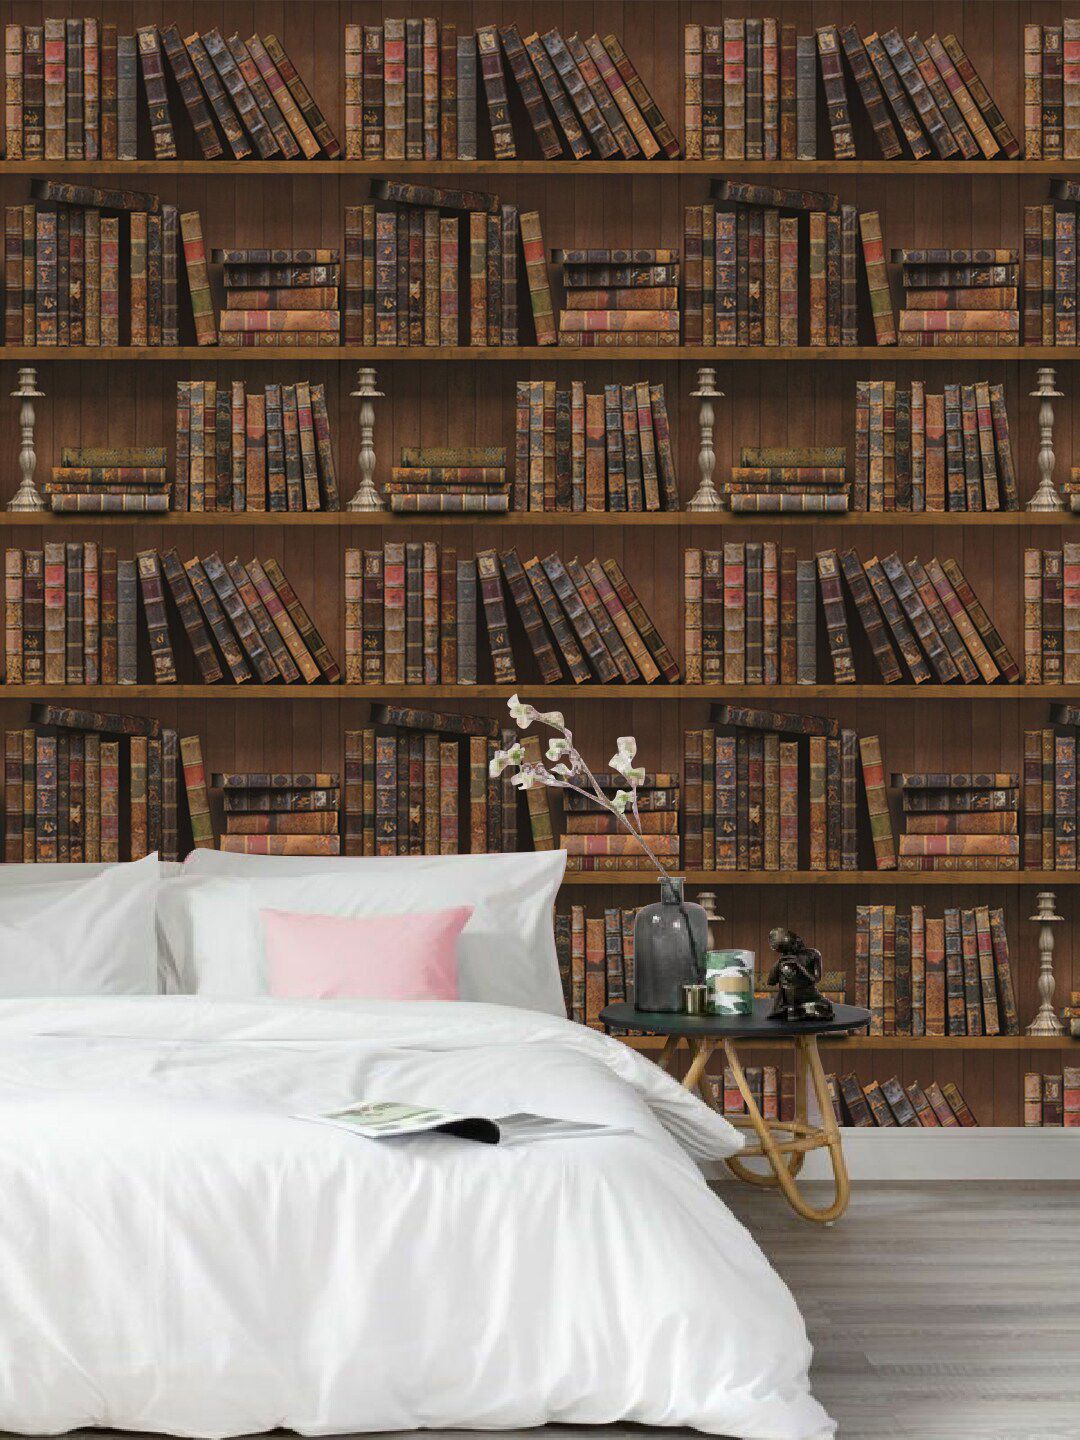 Jaamso Royals Vintage Bookshelf  Wall Sticker Price in India